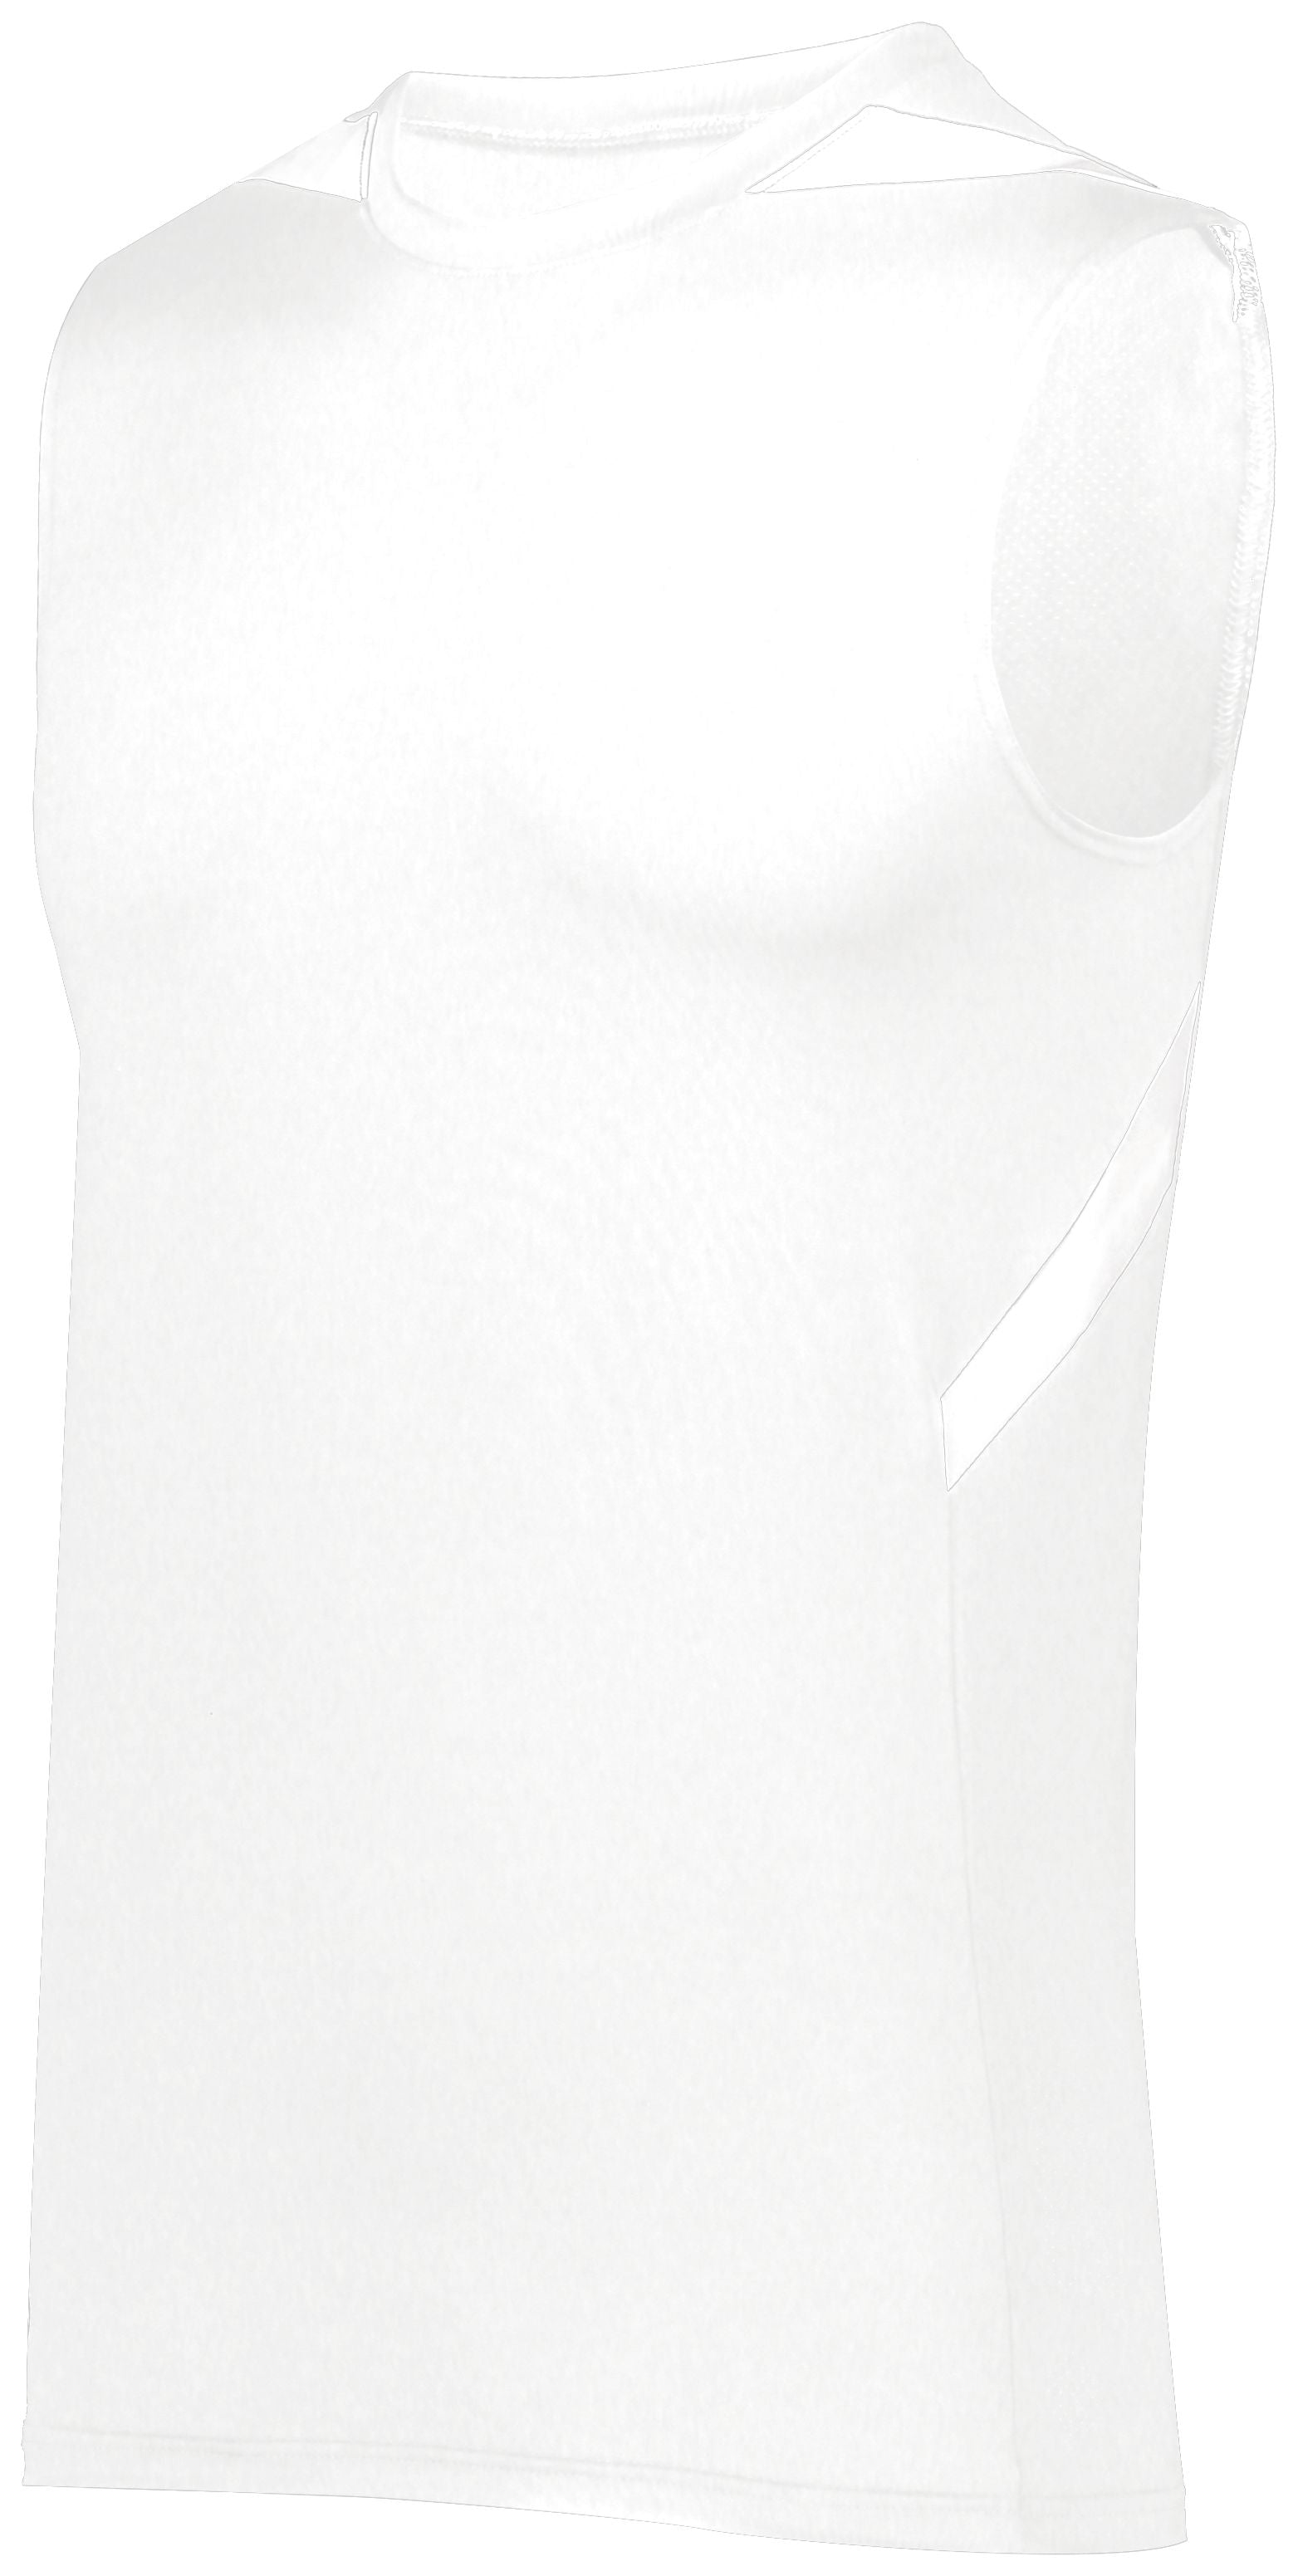 Holloway Pr Max Compression Jersey in White/White  -Part of the Adult, Adult-Jersey, Track-Field, Holloway, Shirts product lines at KanaleyCreations.com